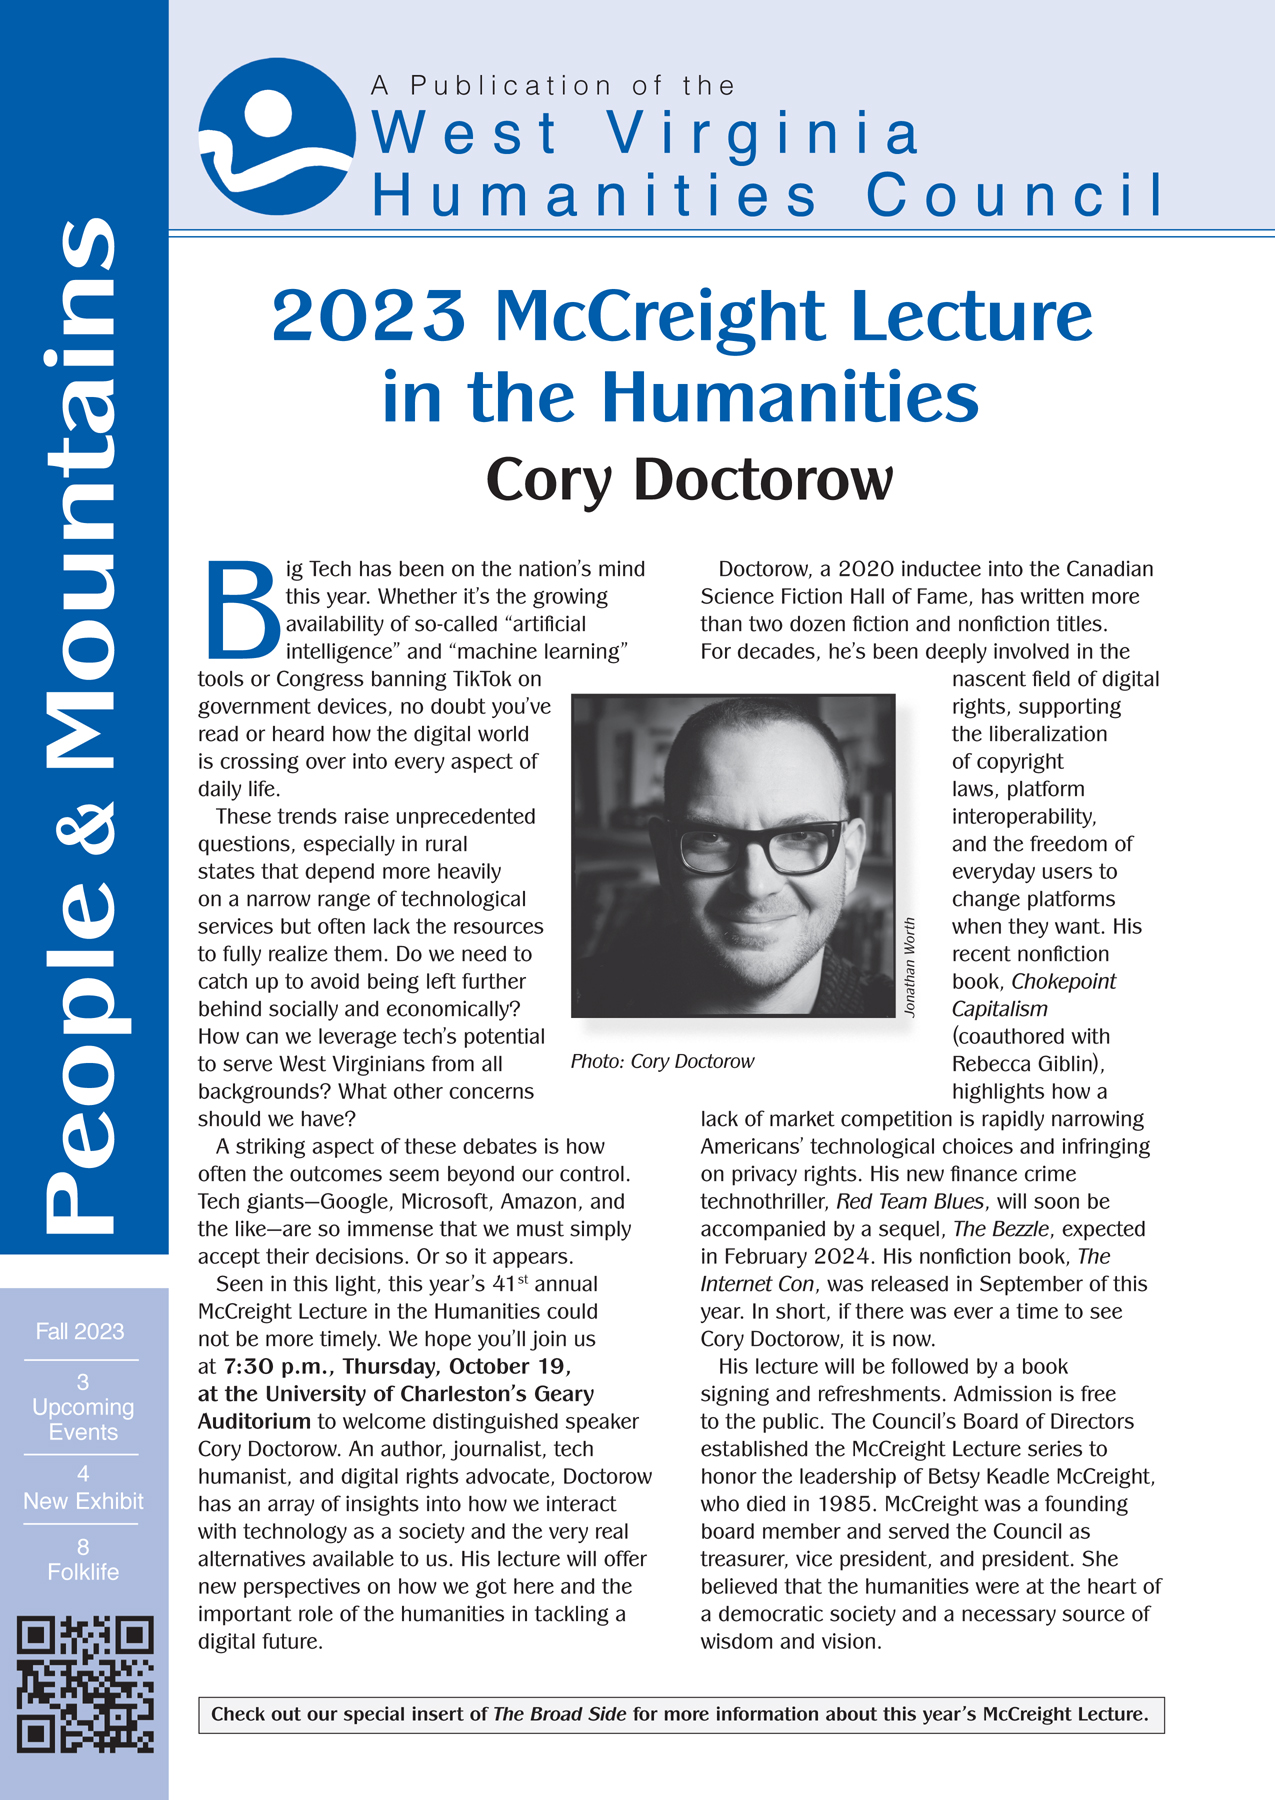 Cover of Fall 2023 People & Mountains, with photo of Cory Doctorow, titled 2023 McCreight Lecture in the Humanities